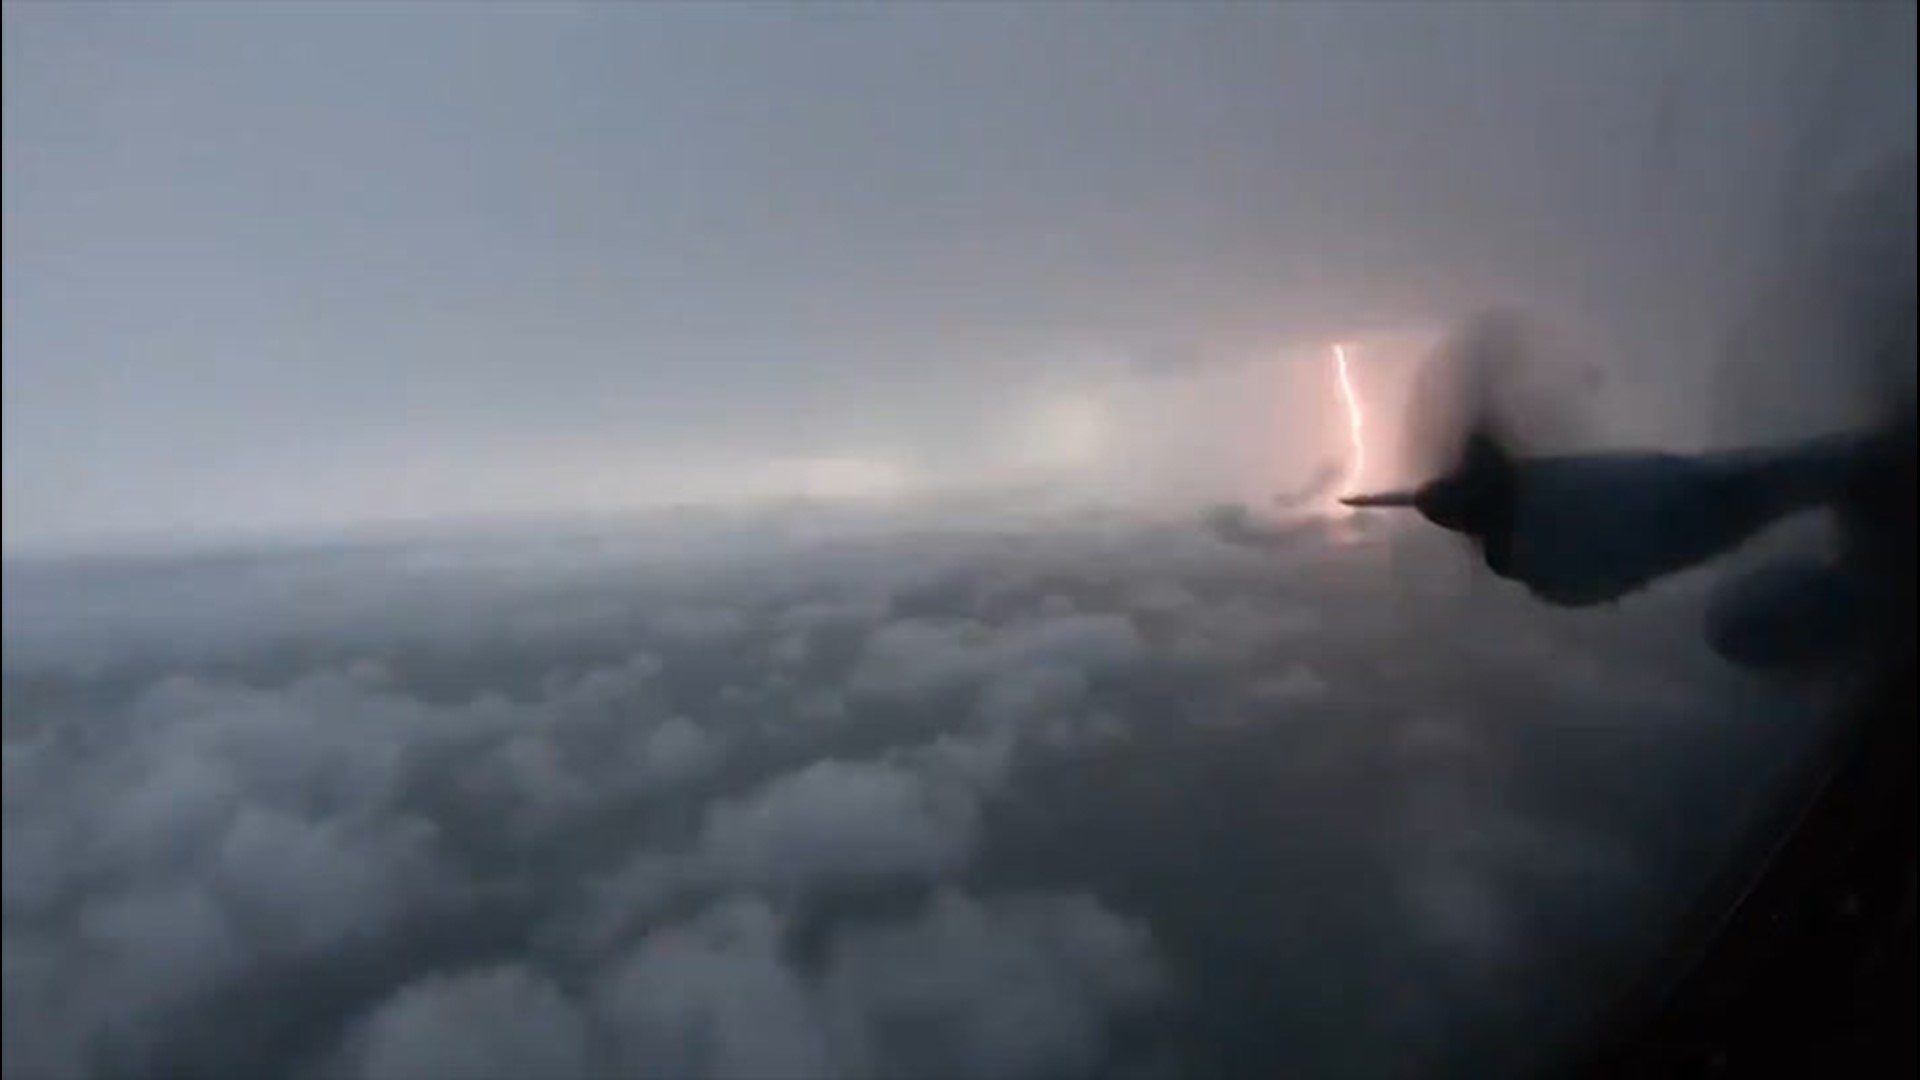 Ride along with the Hurricane Hunters as they fly through Tropical Storm Cristobal at 2,500 feet to collect weather data on June 3.